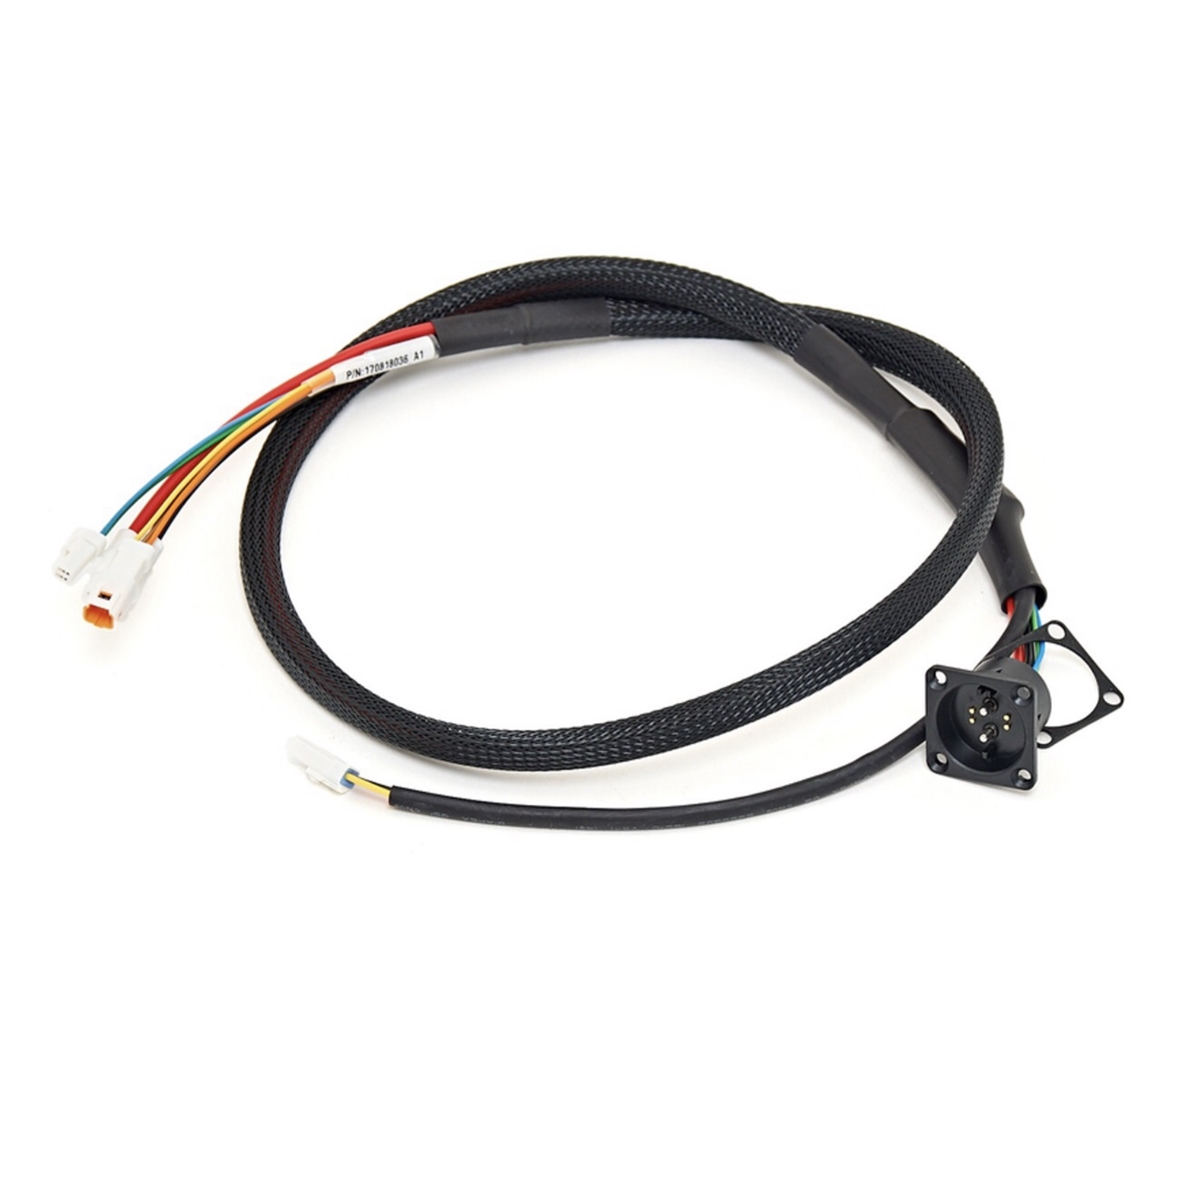 Ignition cable for Jam2 Shimano models